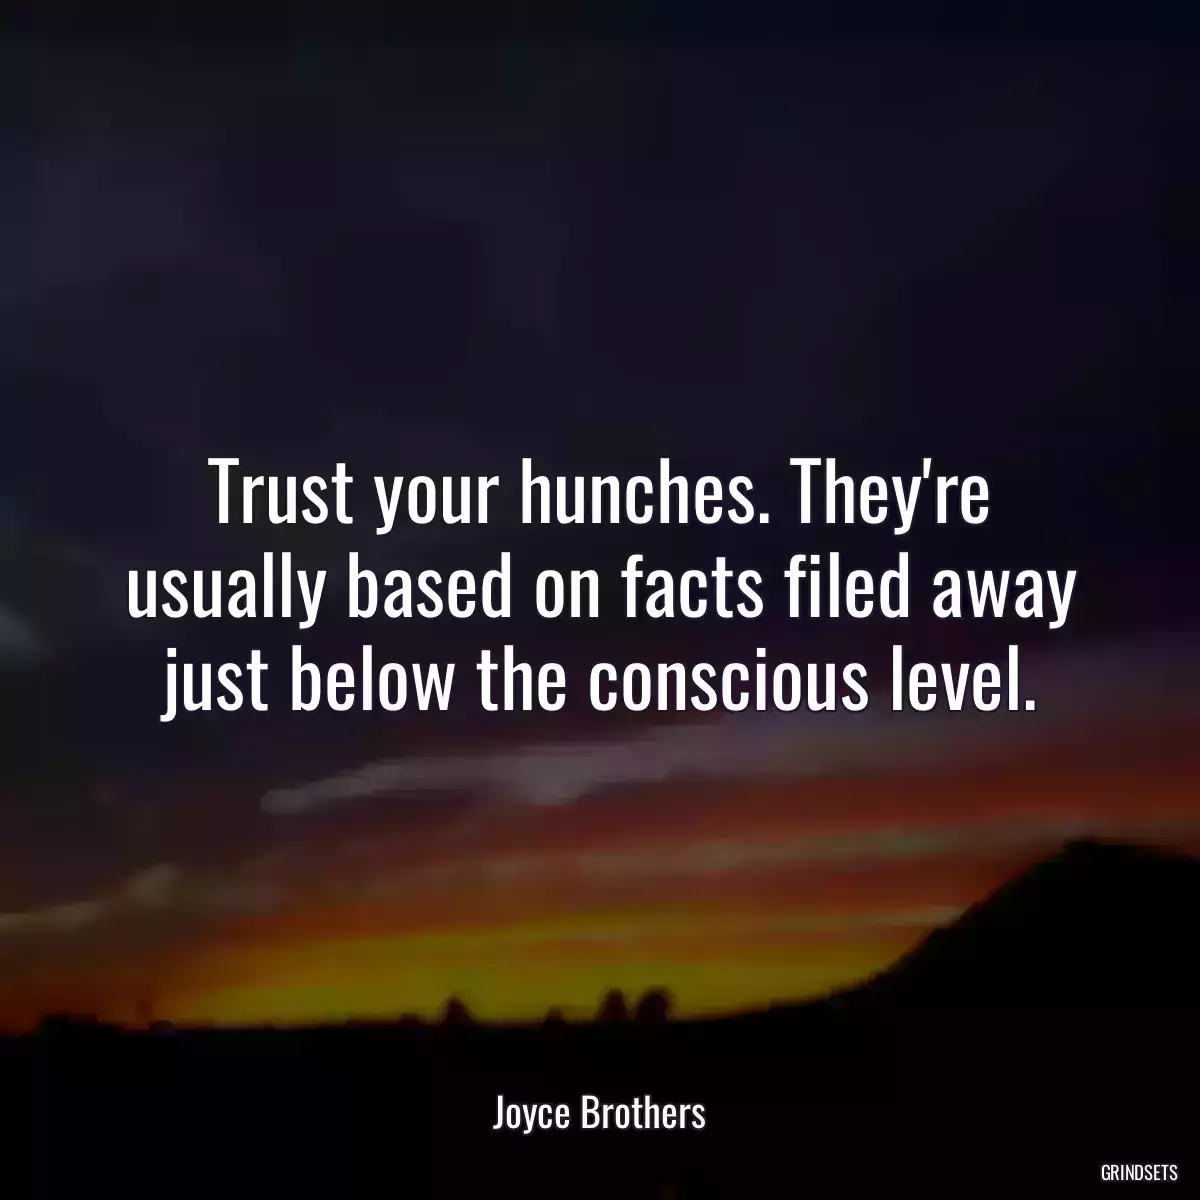 Trust your hunches. They\'re usually based on facts filed away just below the conscious level.